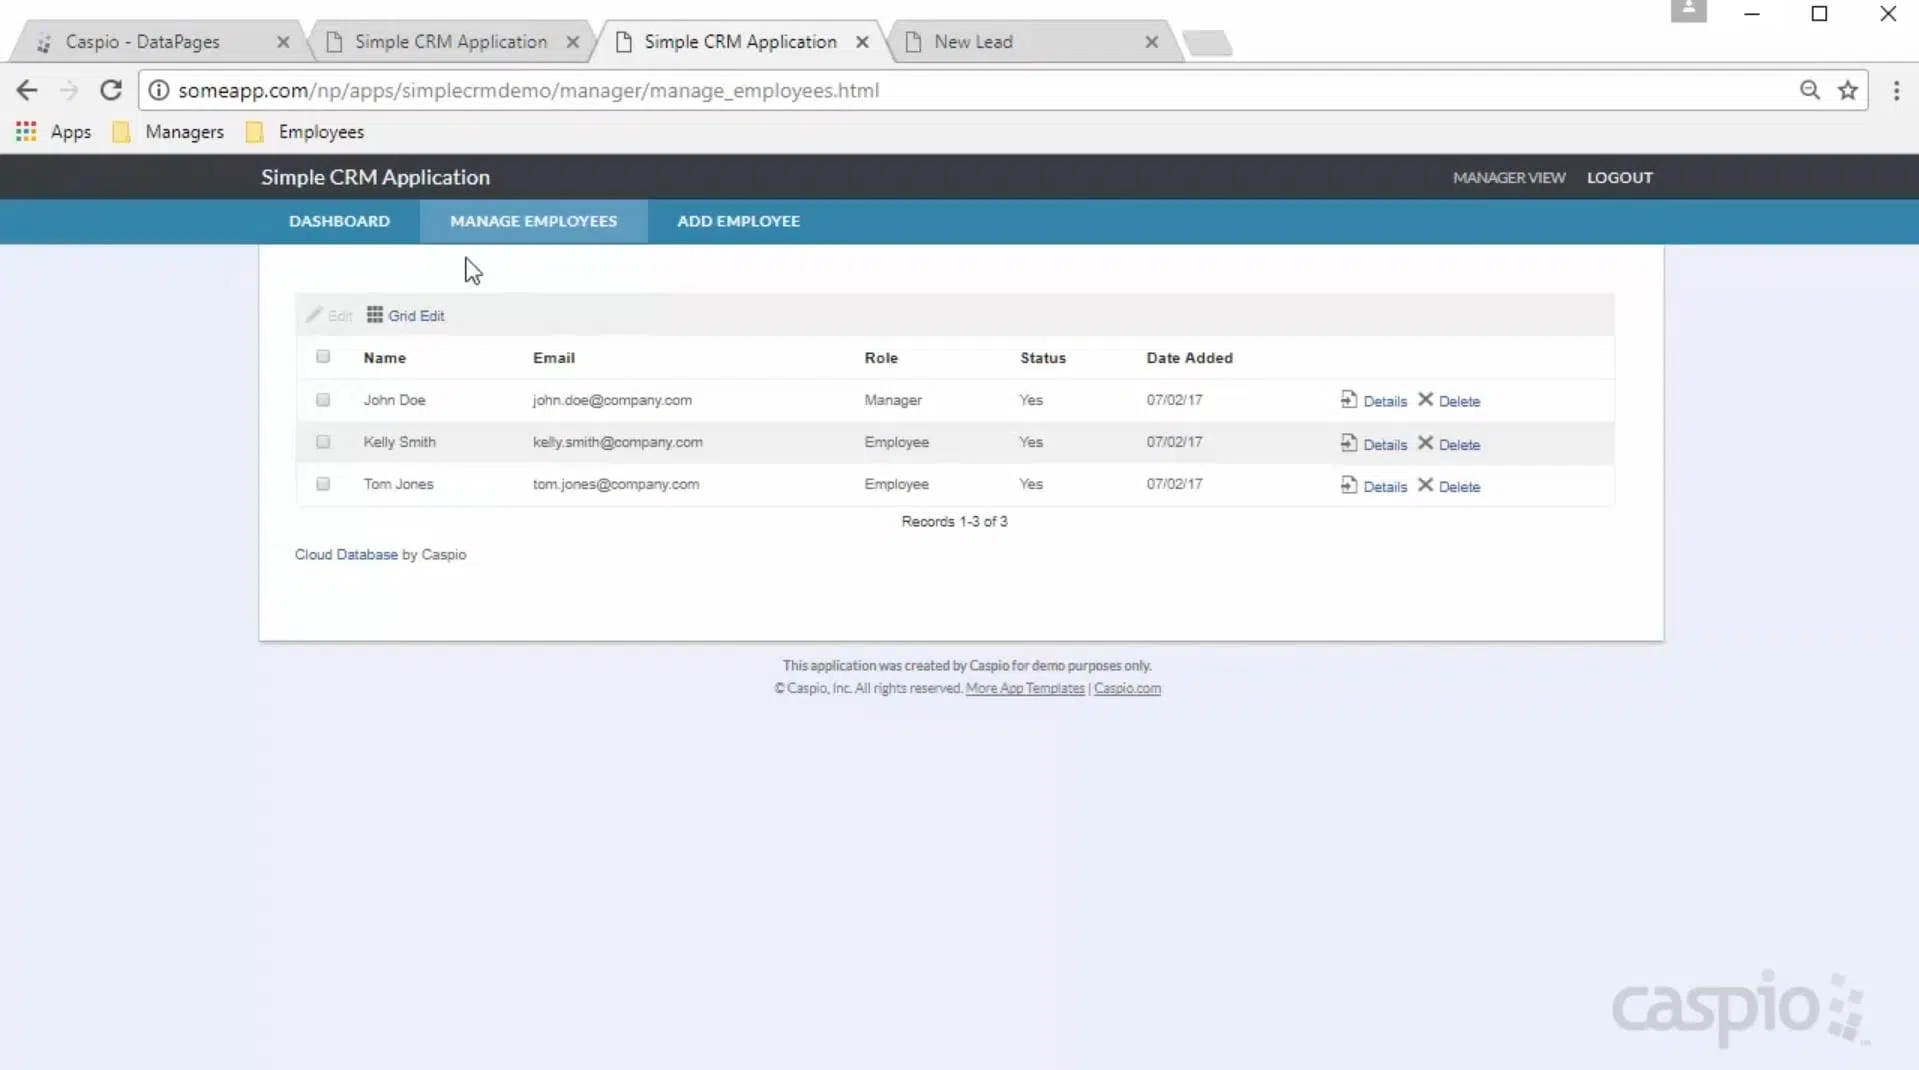 Screenshot of a sample CRM application designed on Caspio. It shows a “Manage Employee” interface, featuring a table containing relevant information.